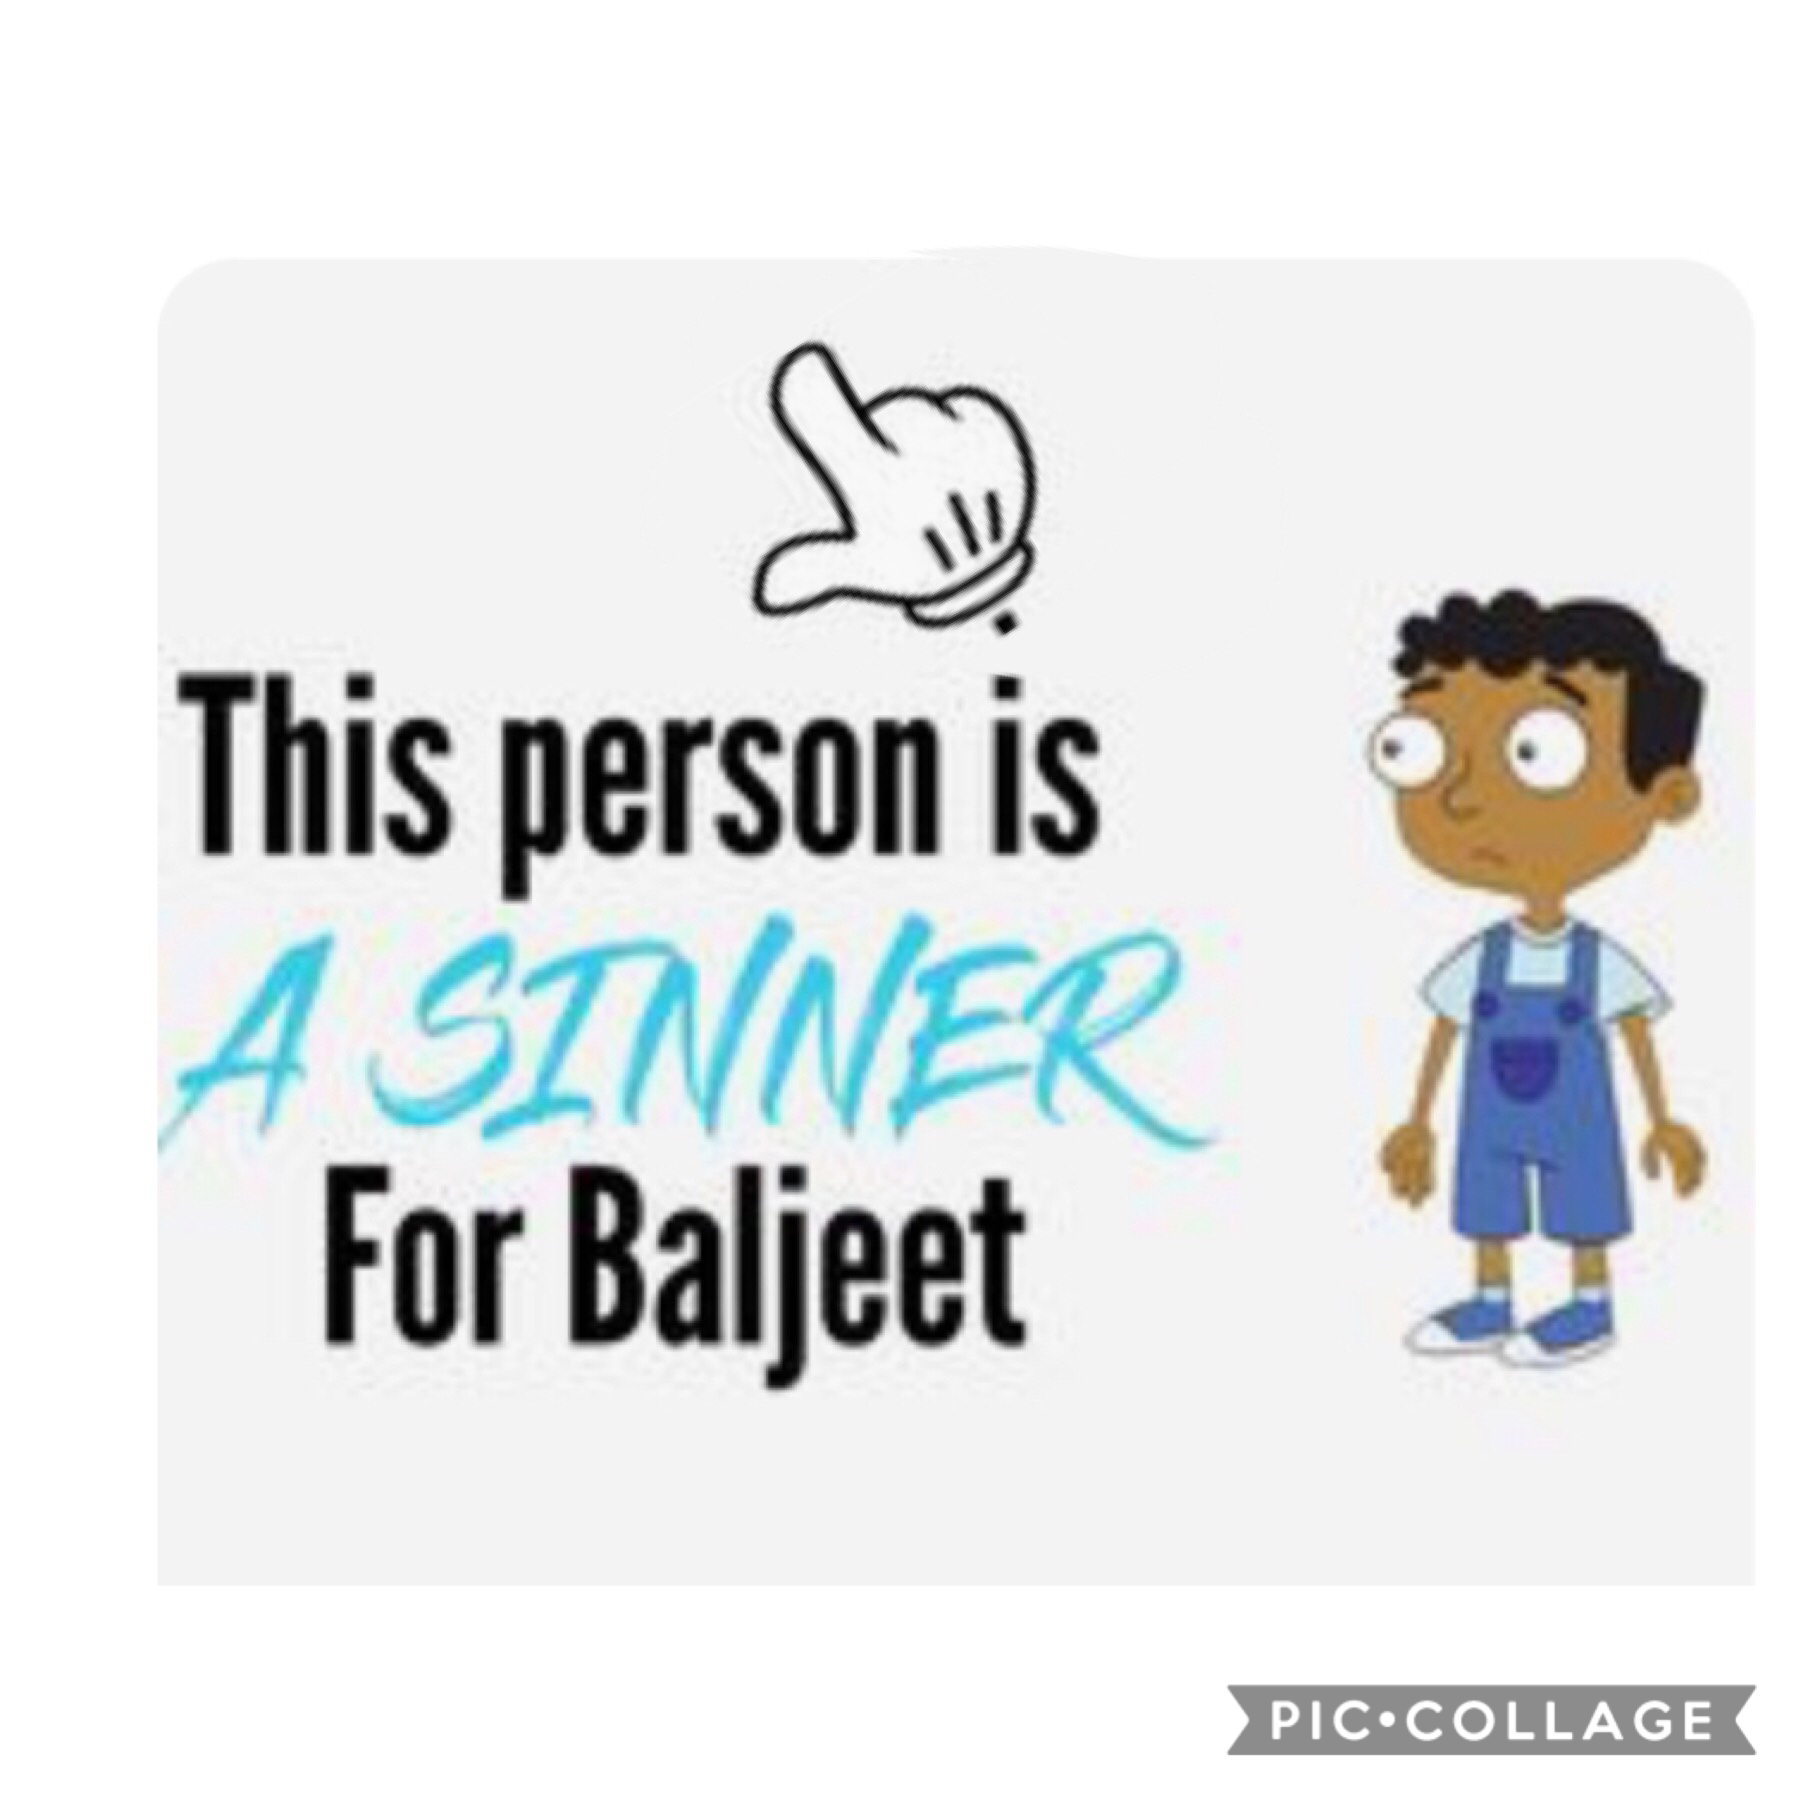 idk if this will be pointing to my pfp or someone above me i think we’re all sińners for baljeet😍😍😍💯💯